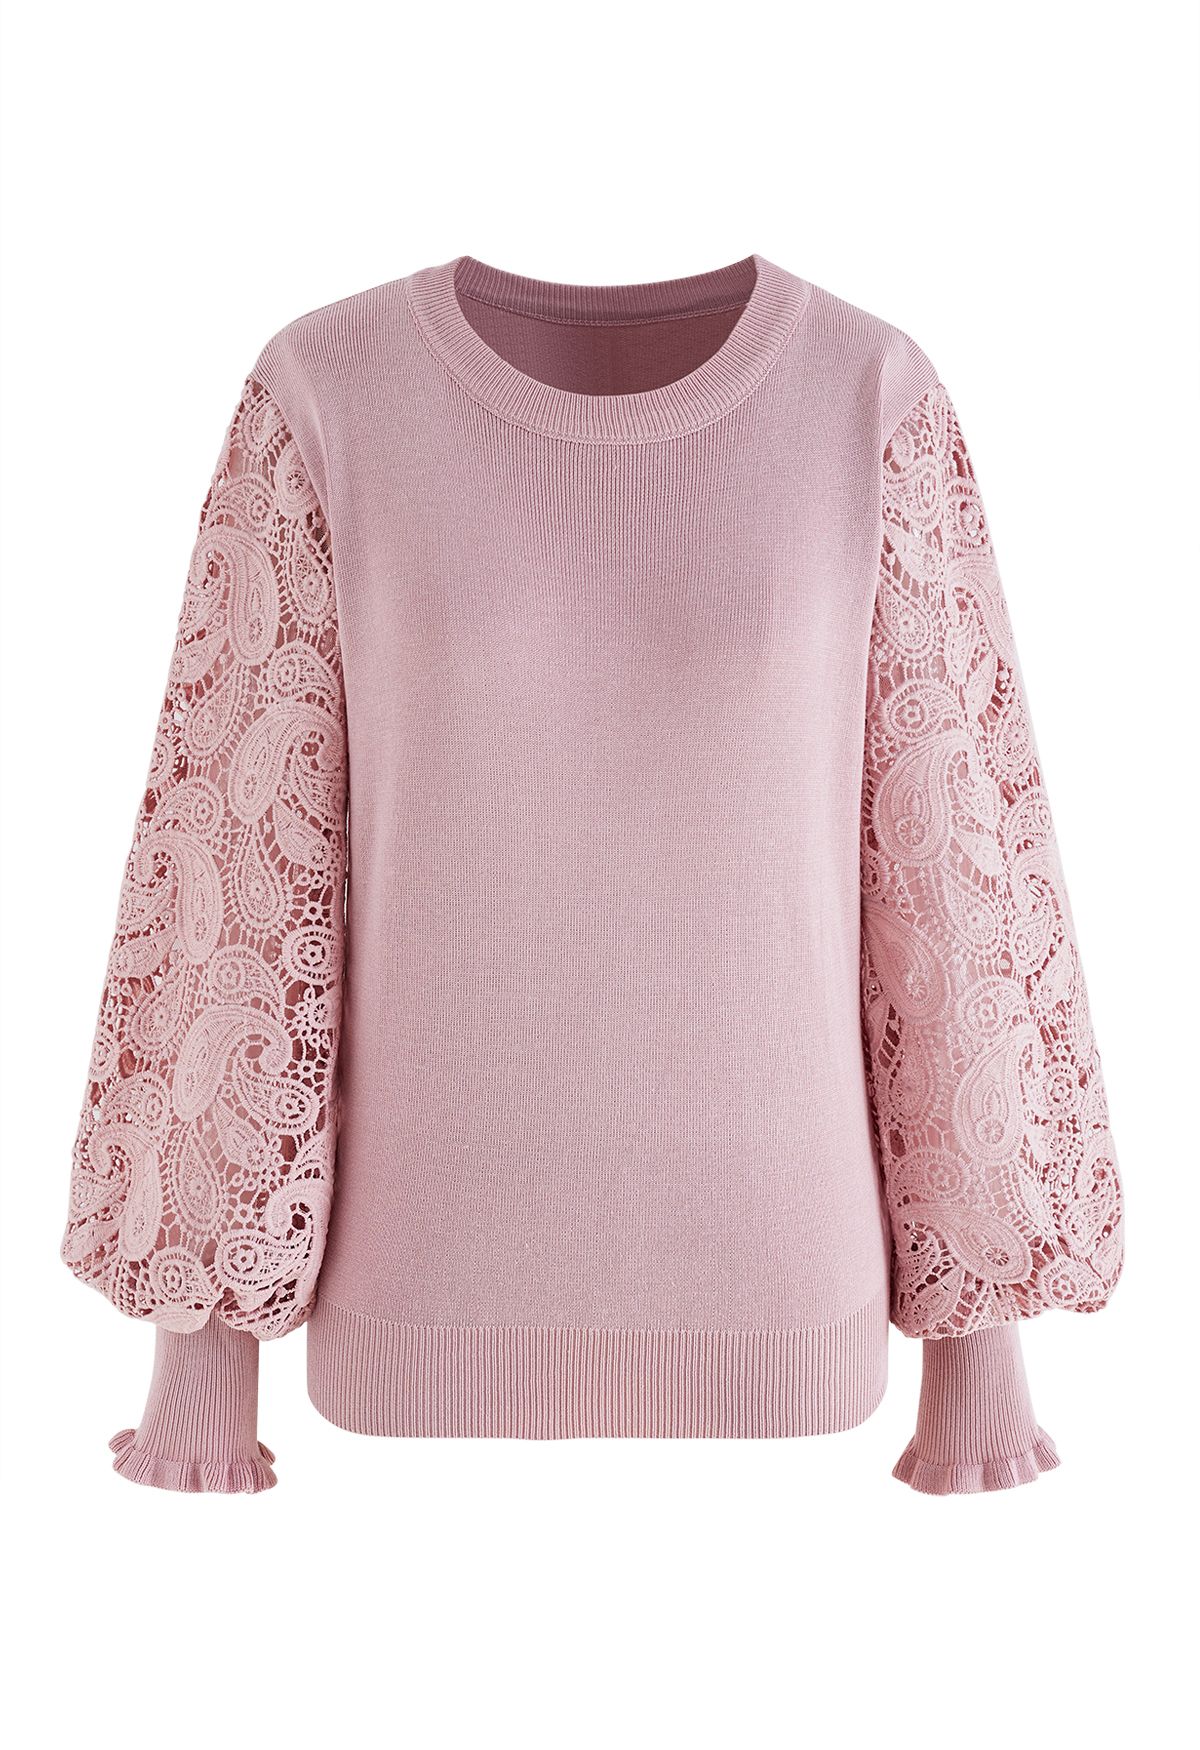 Paisley Crochet Sleeve Knit Top in Pink